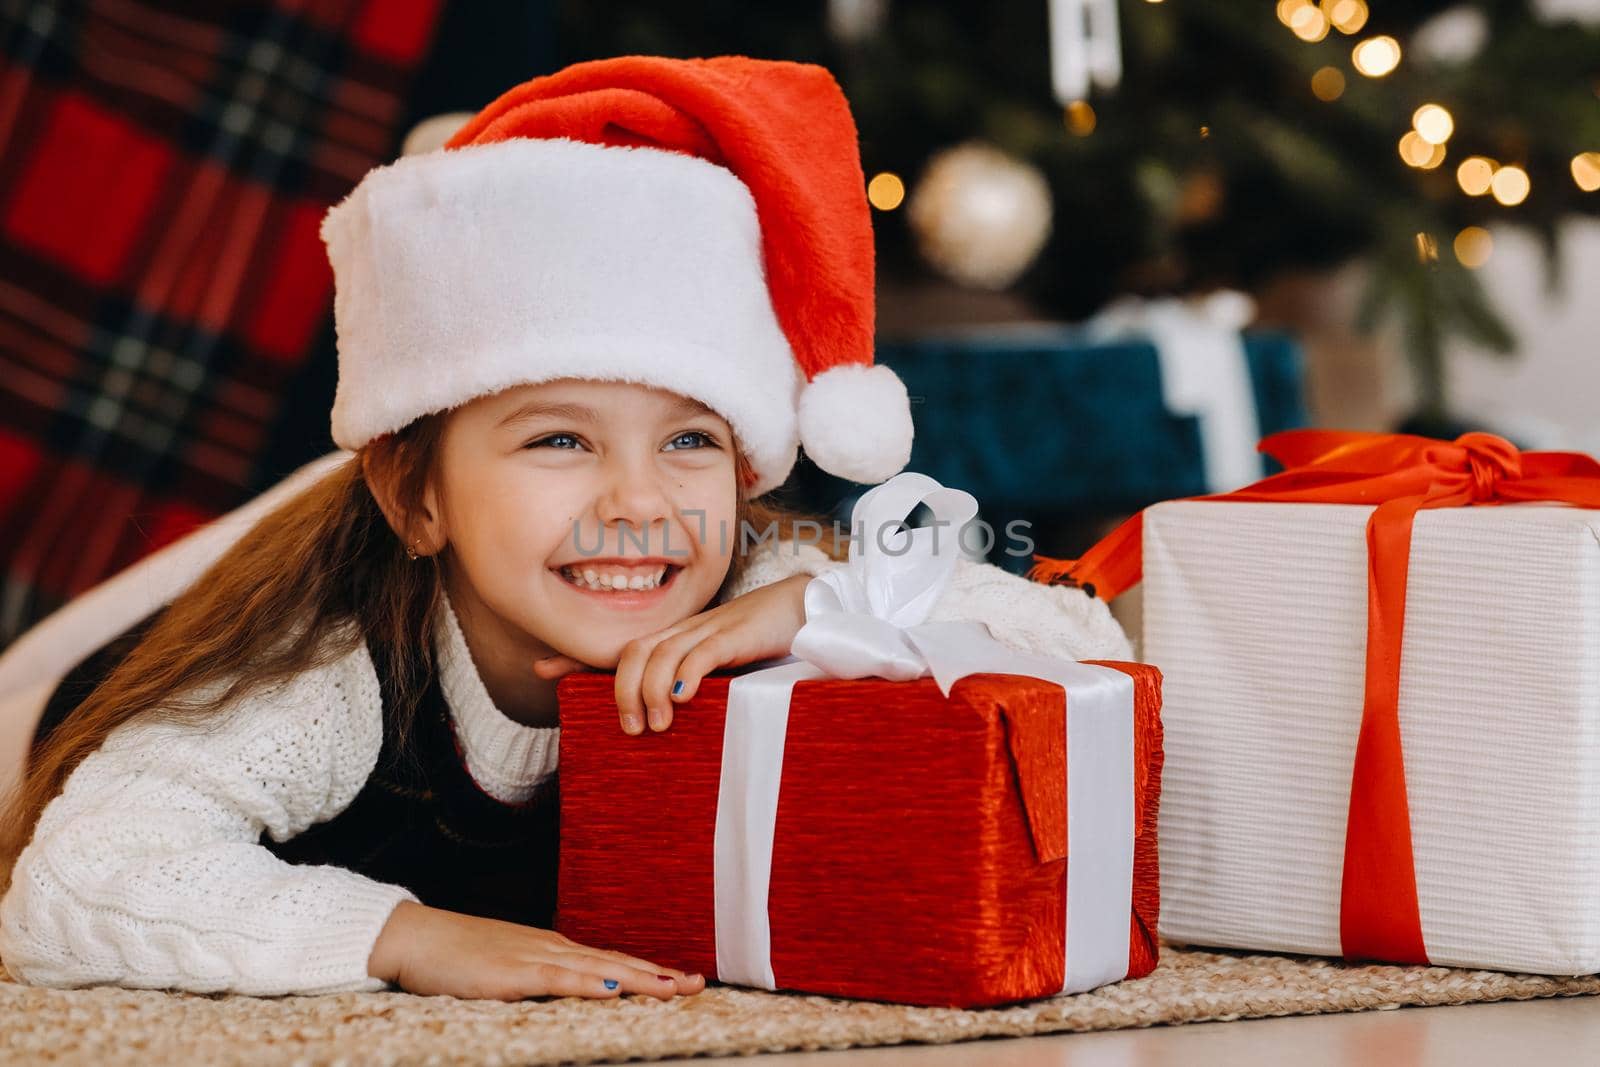 A happy little girl in a Santa Claus hat smiles with gifts in her hands.